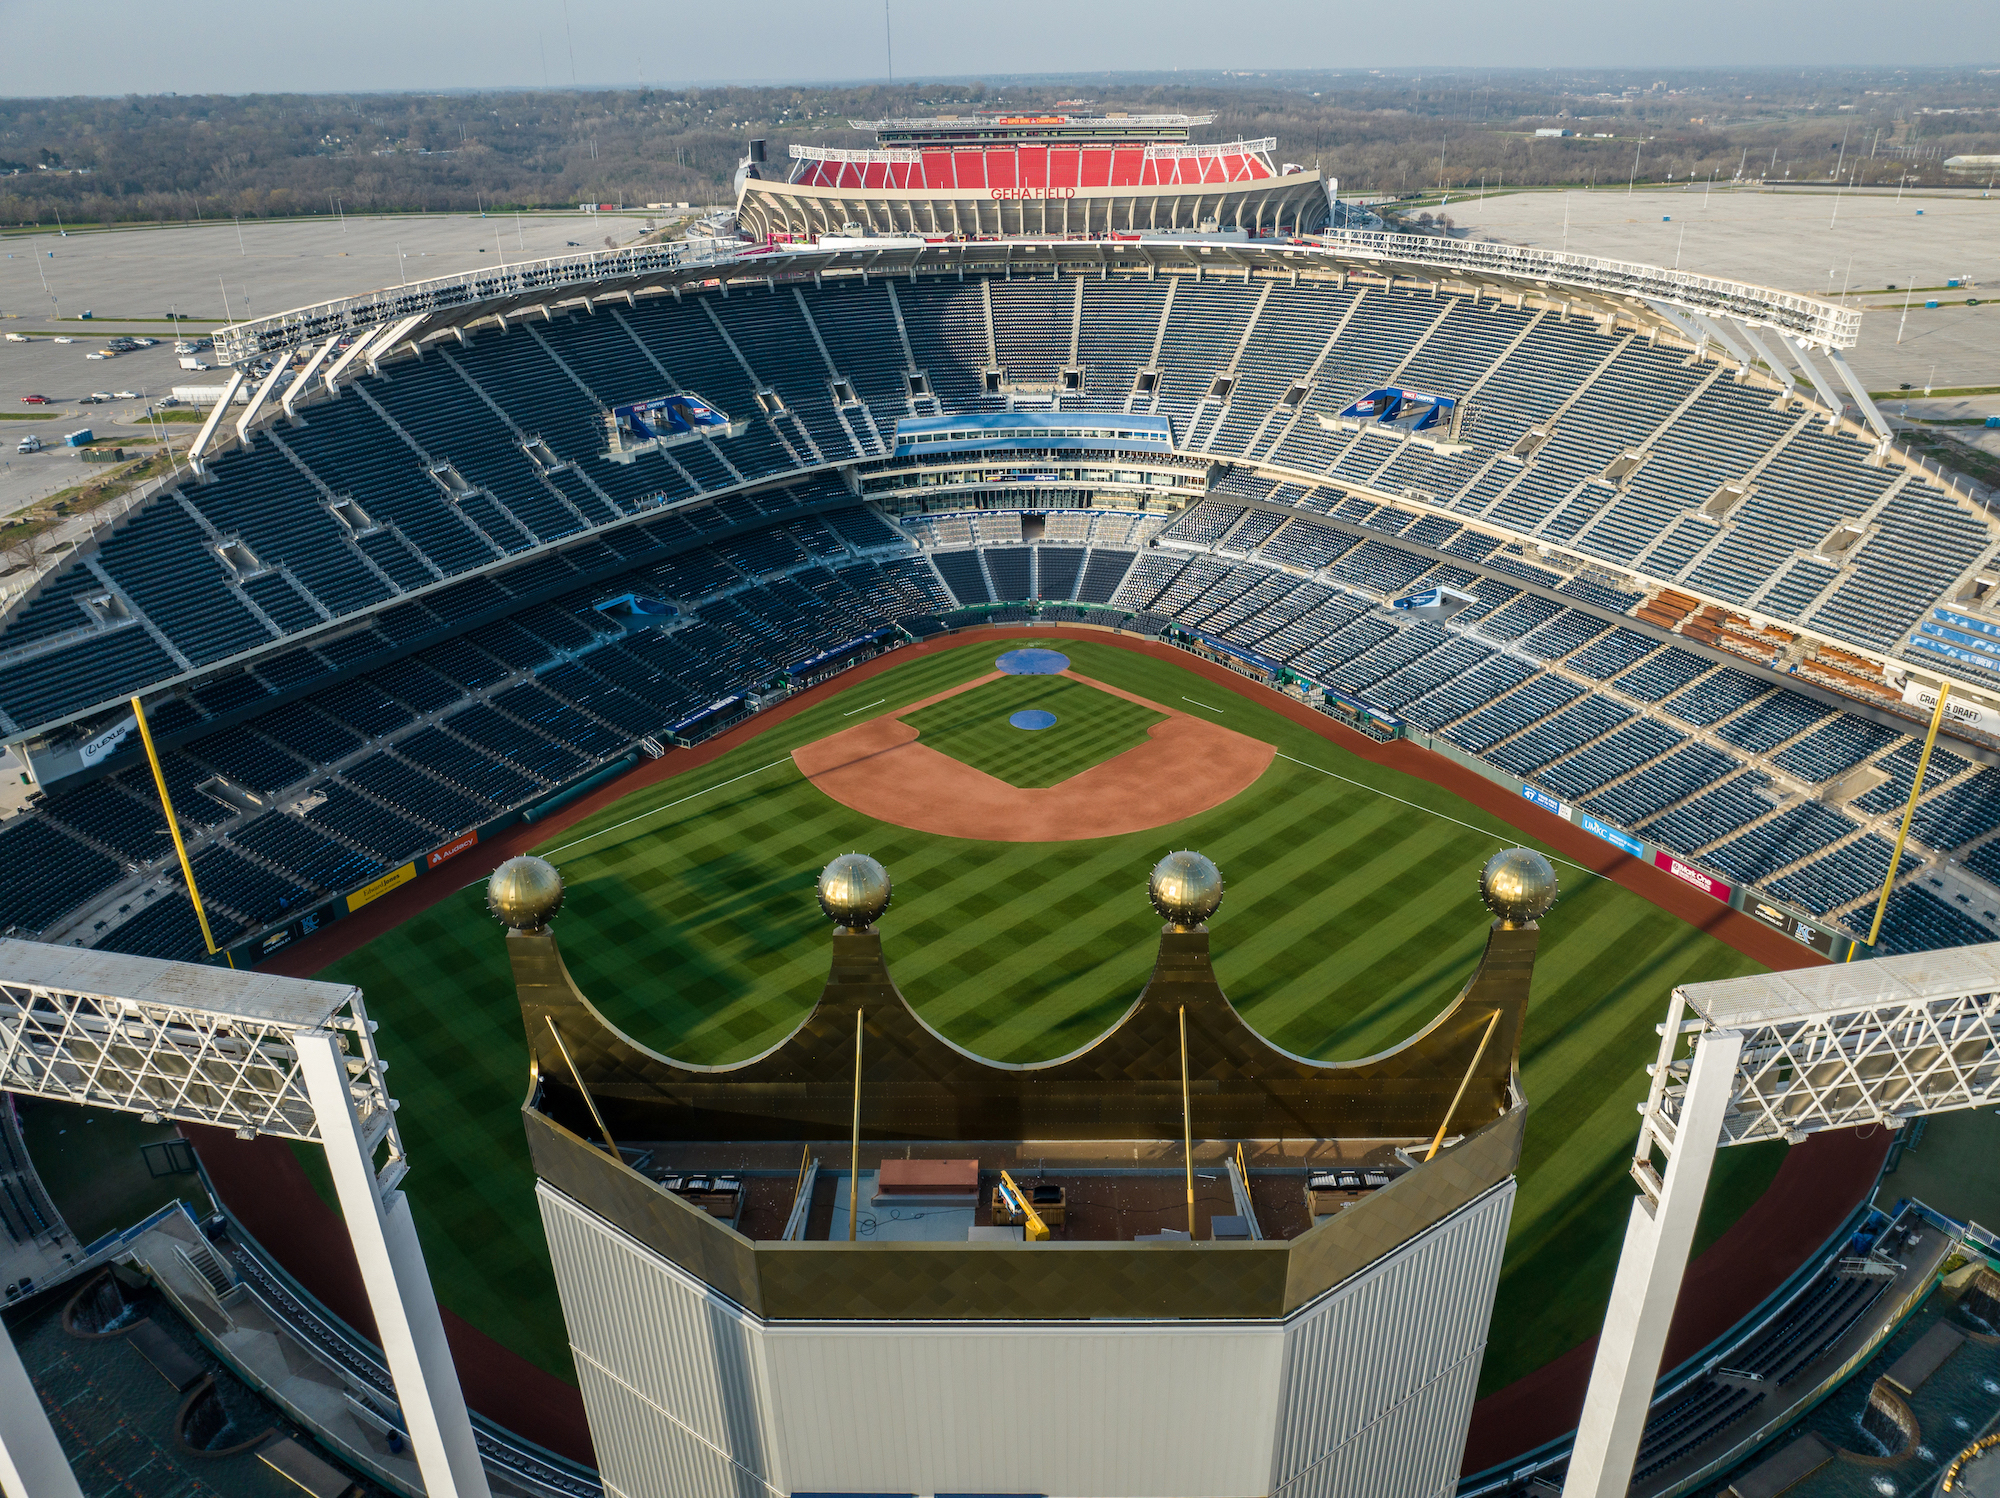 Kauffman Stadium is the home of the Kansas City Royals and beyond it is GEHA Field at Arrowhead Stadium which is the home of the Kansas City Chiefs.